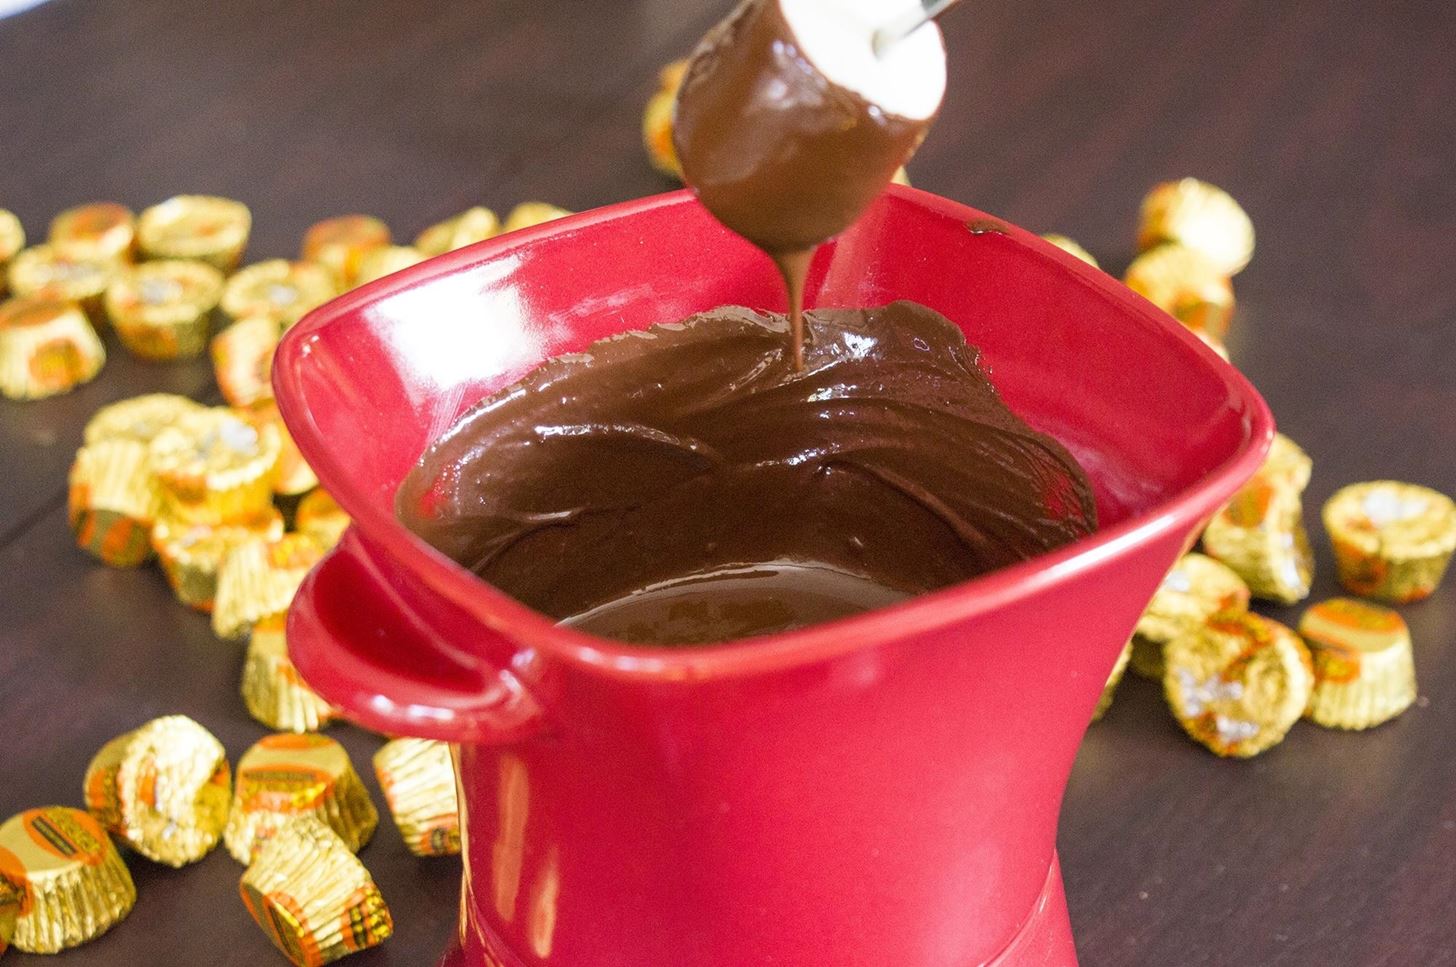 5 Delectable Ways to Use Up Your Leftover Halloween Chocolate